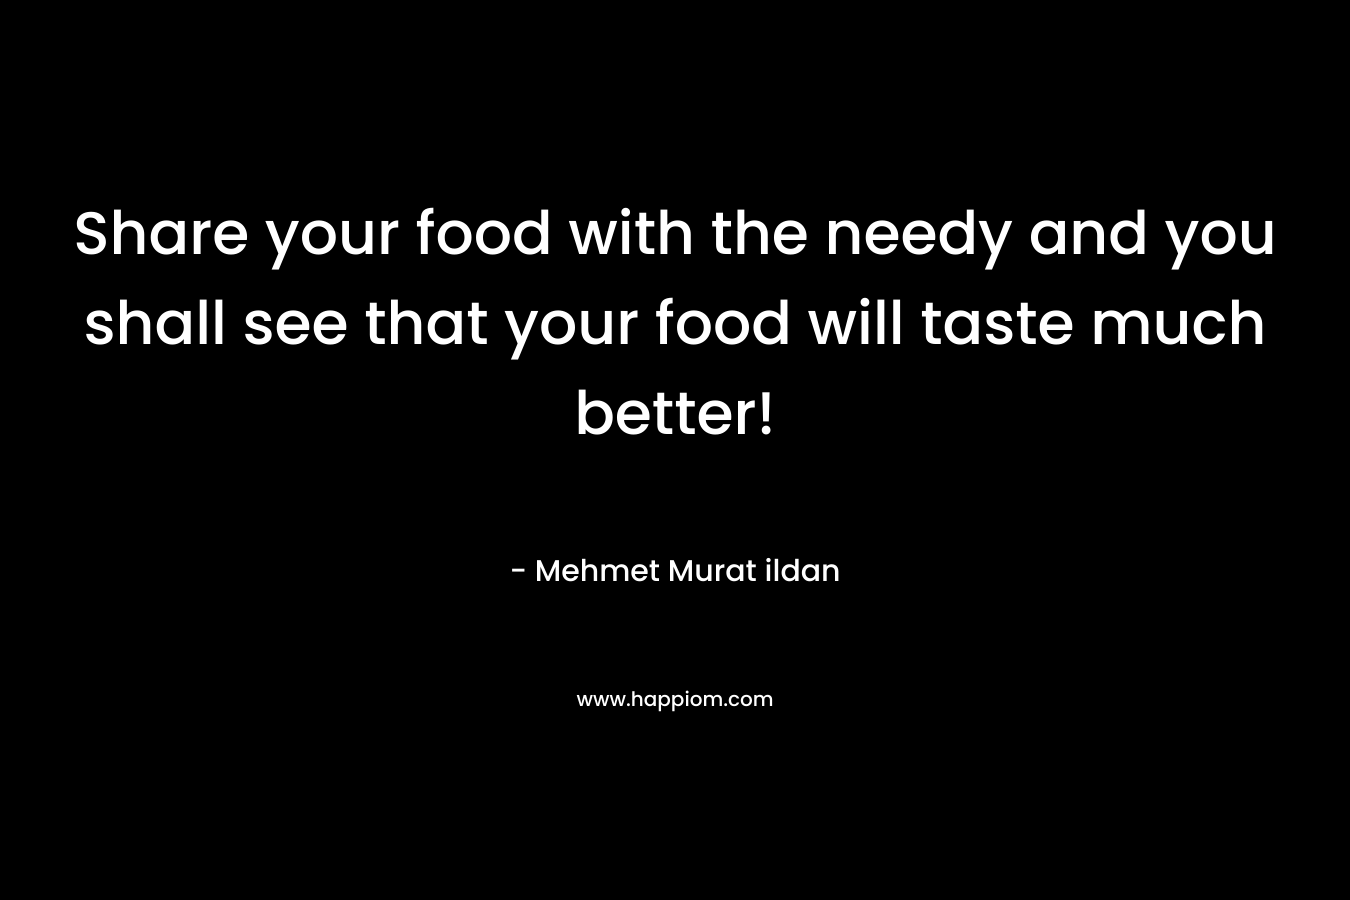 Share your food with the needy and you shall see that your food will taste much better!